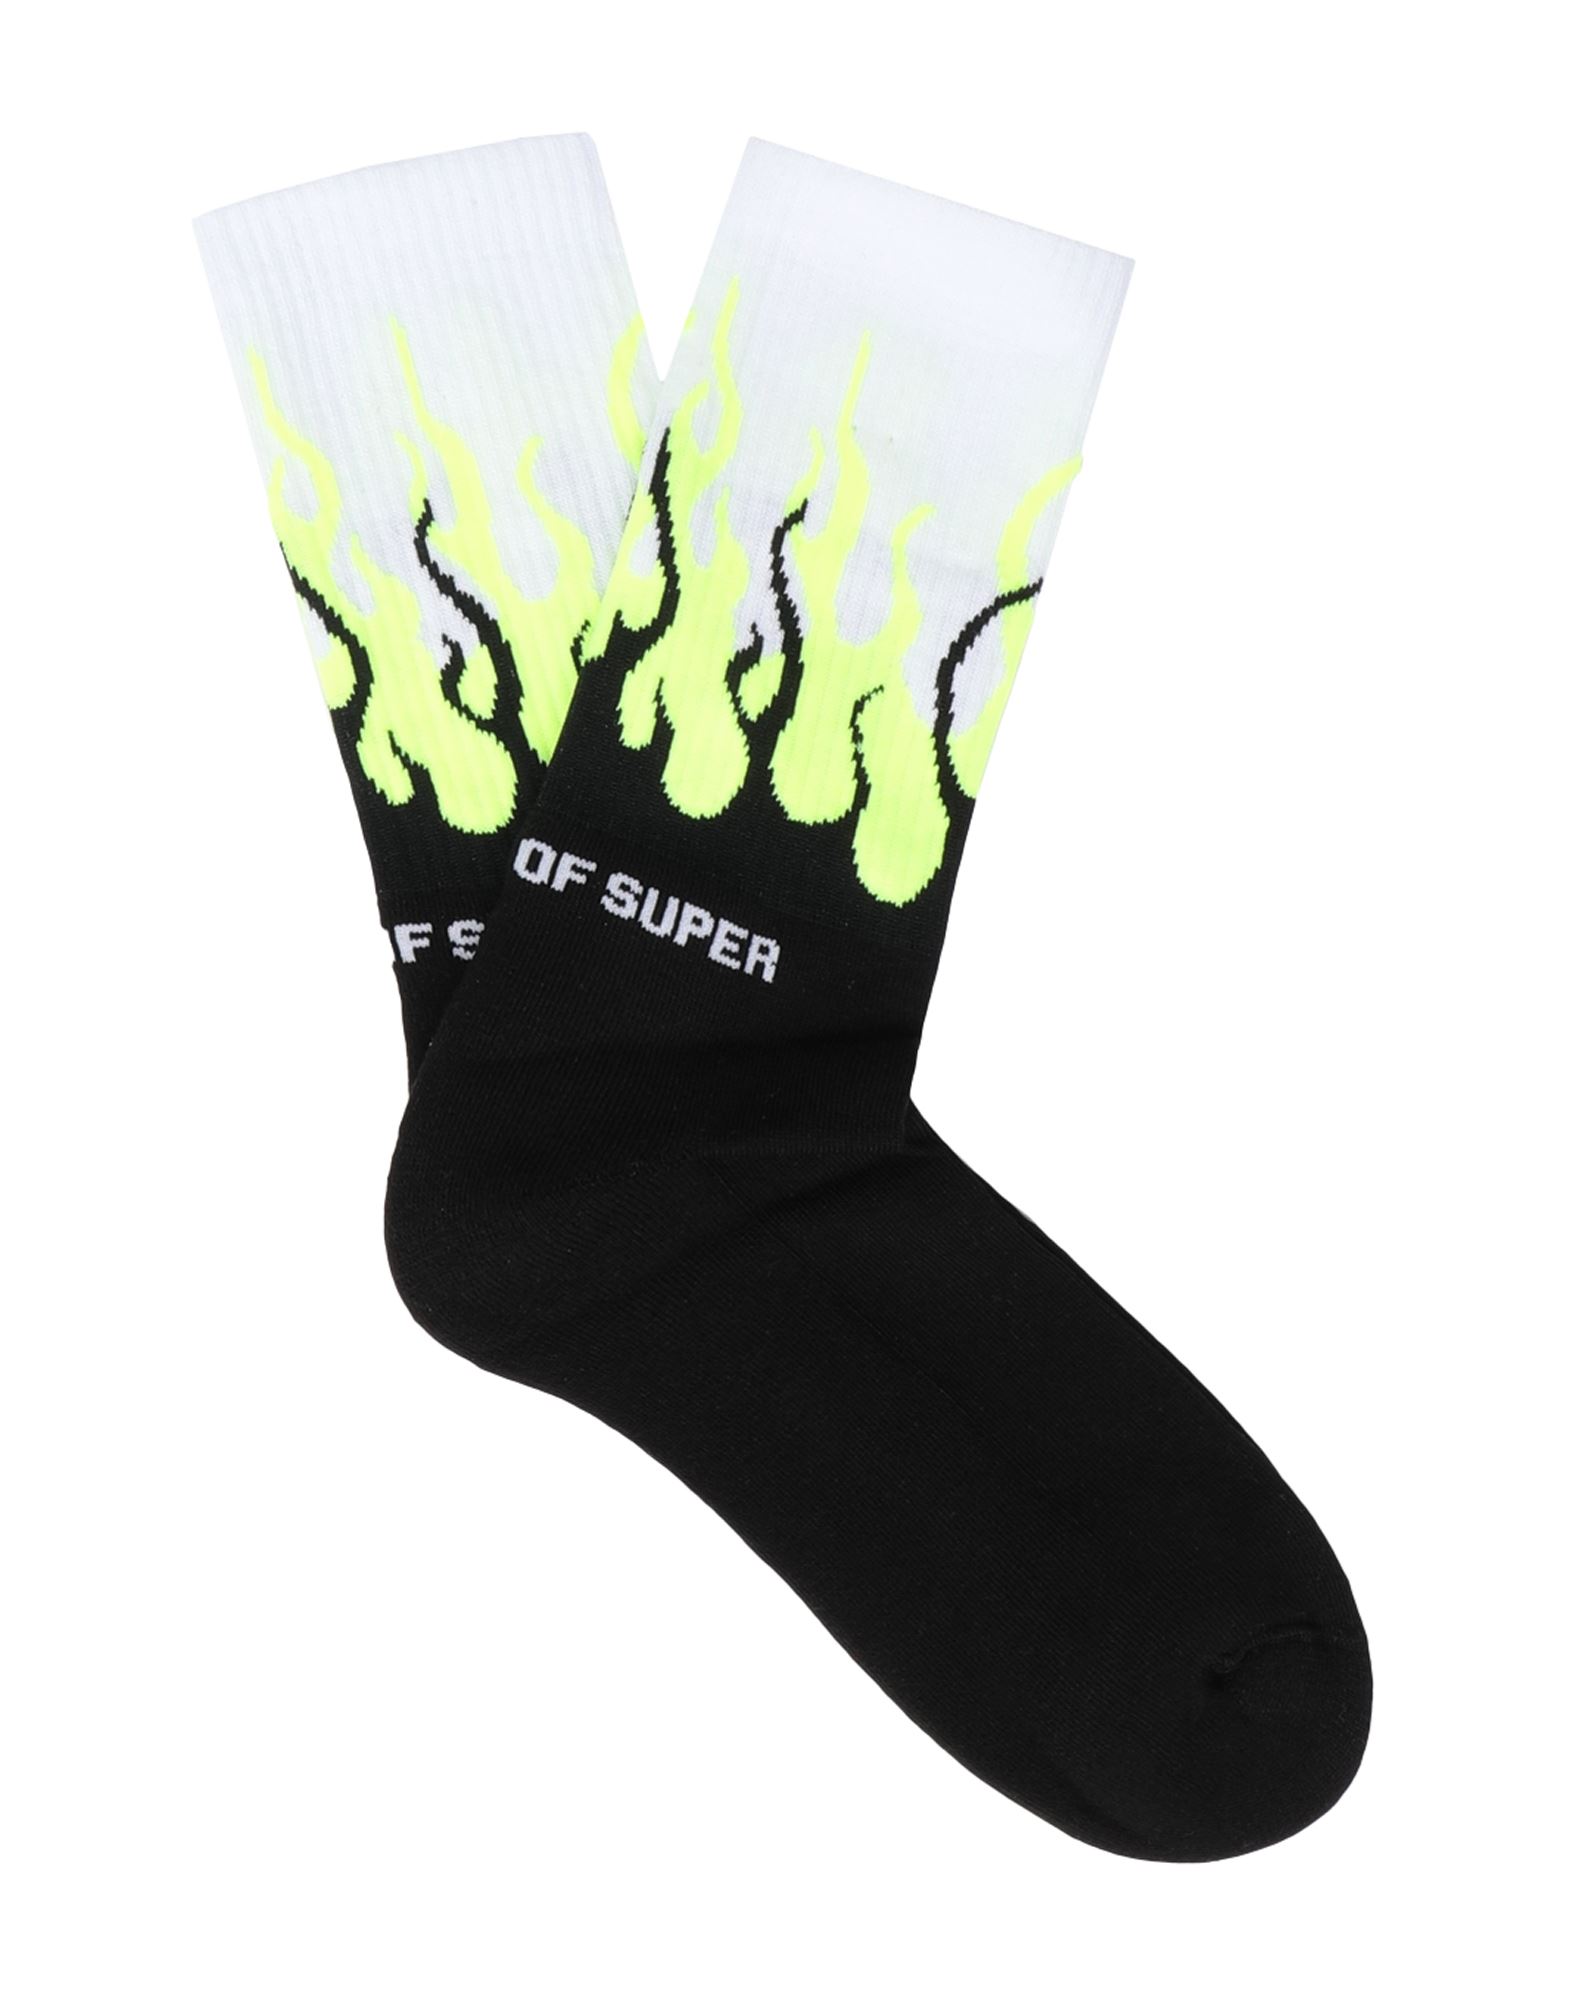 Shop Vision Of Super Black Socks Yellow Fluo Flames Socks & Hosiery Black Size Onesize Cotton, Polyester,